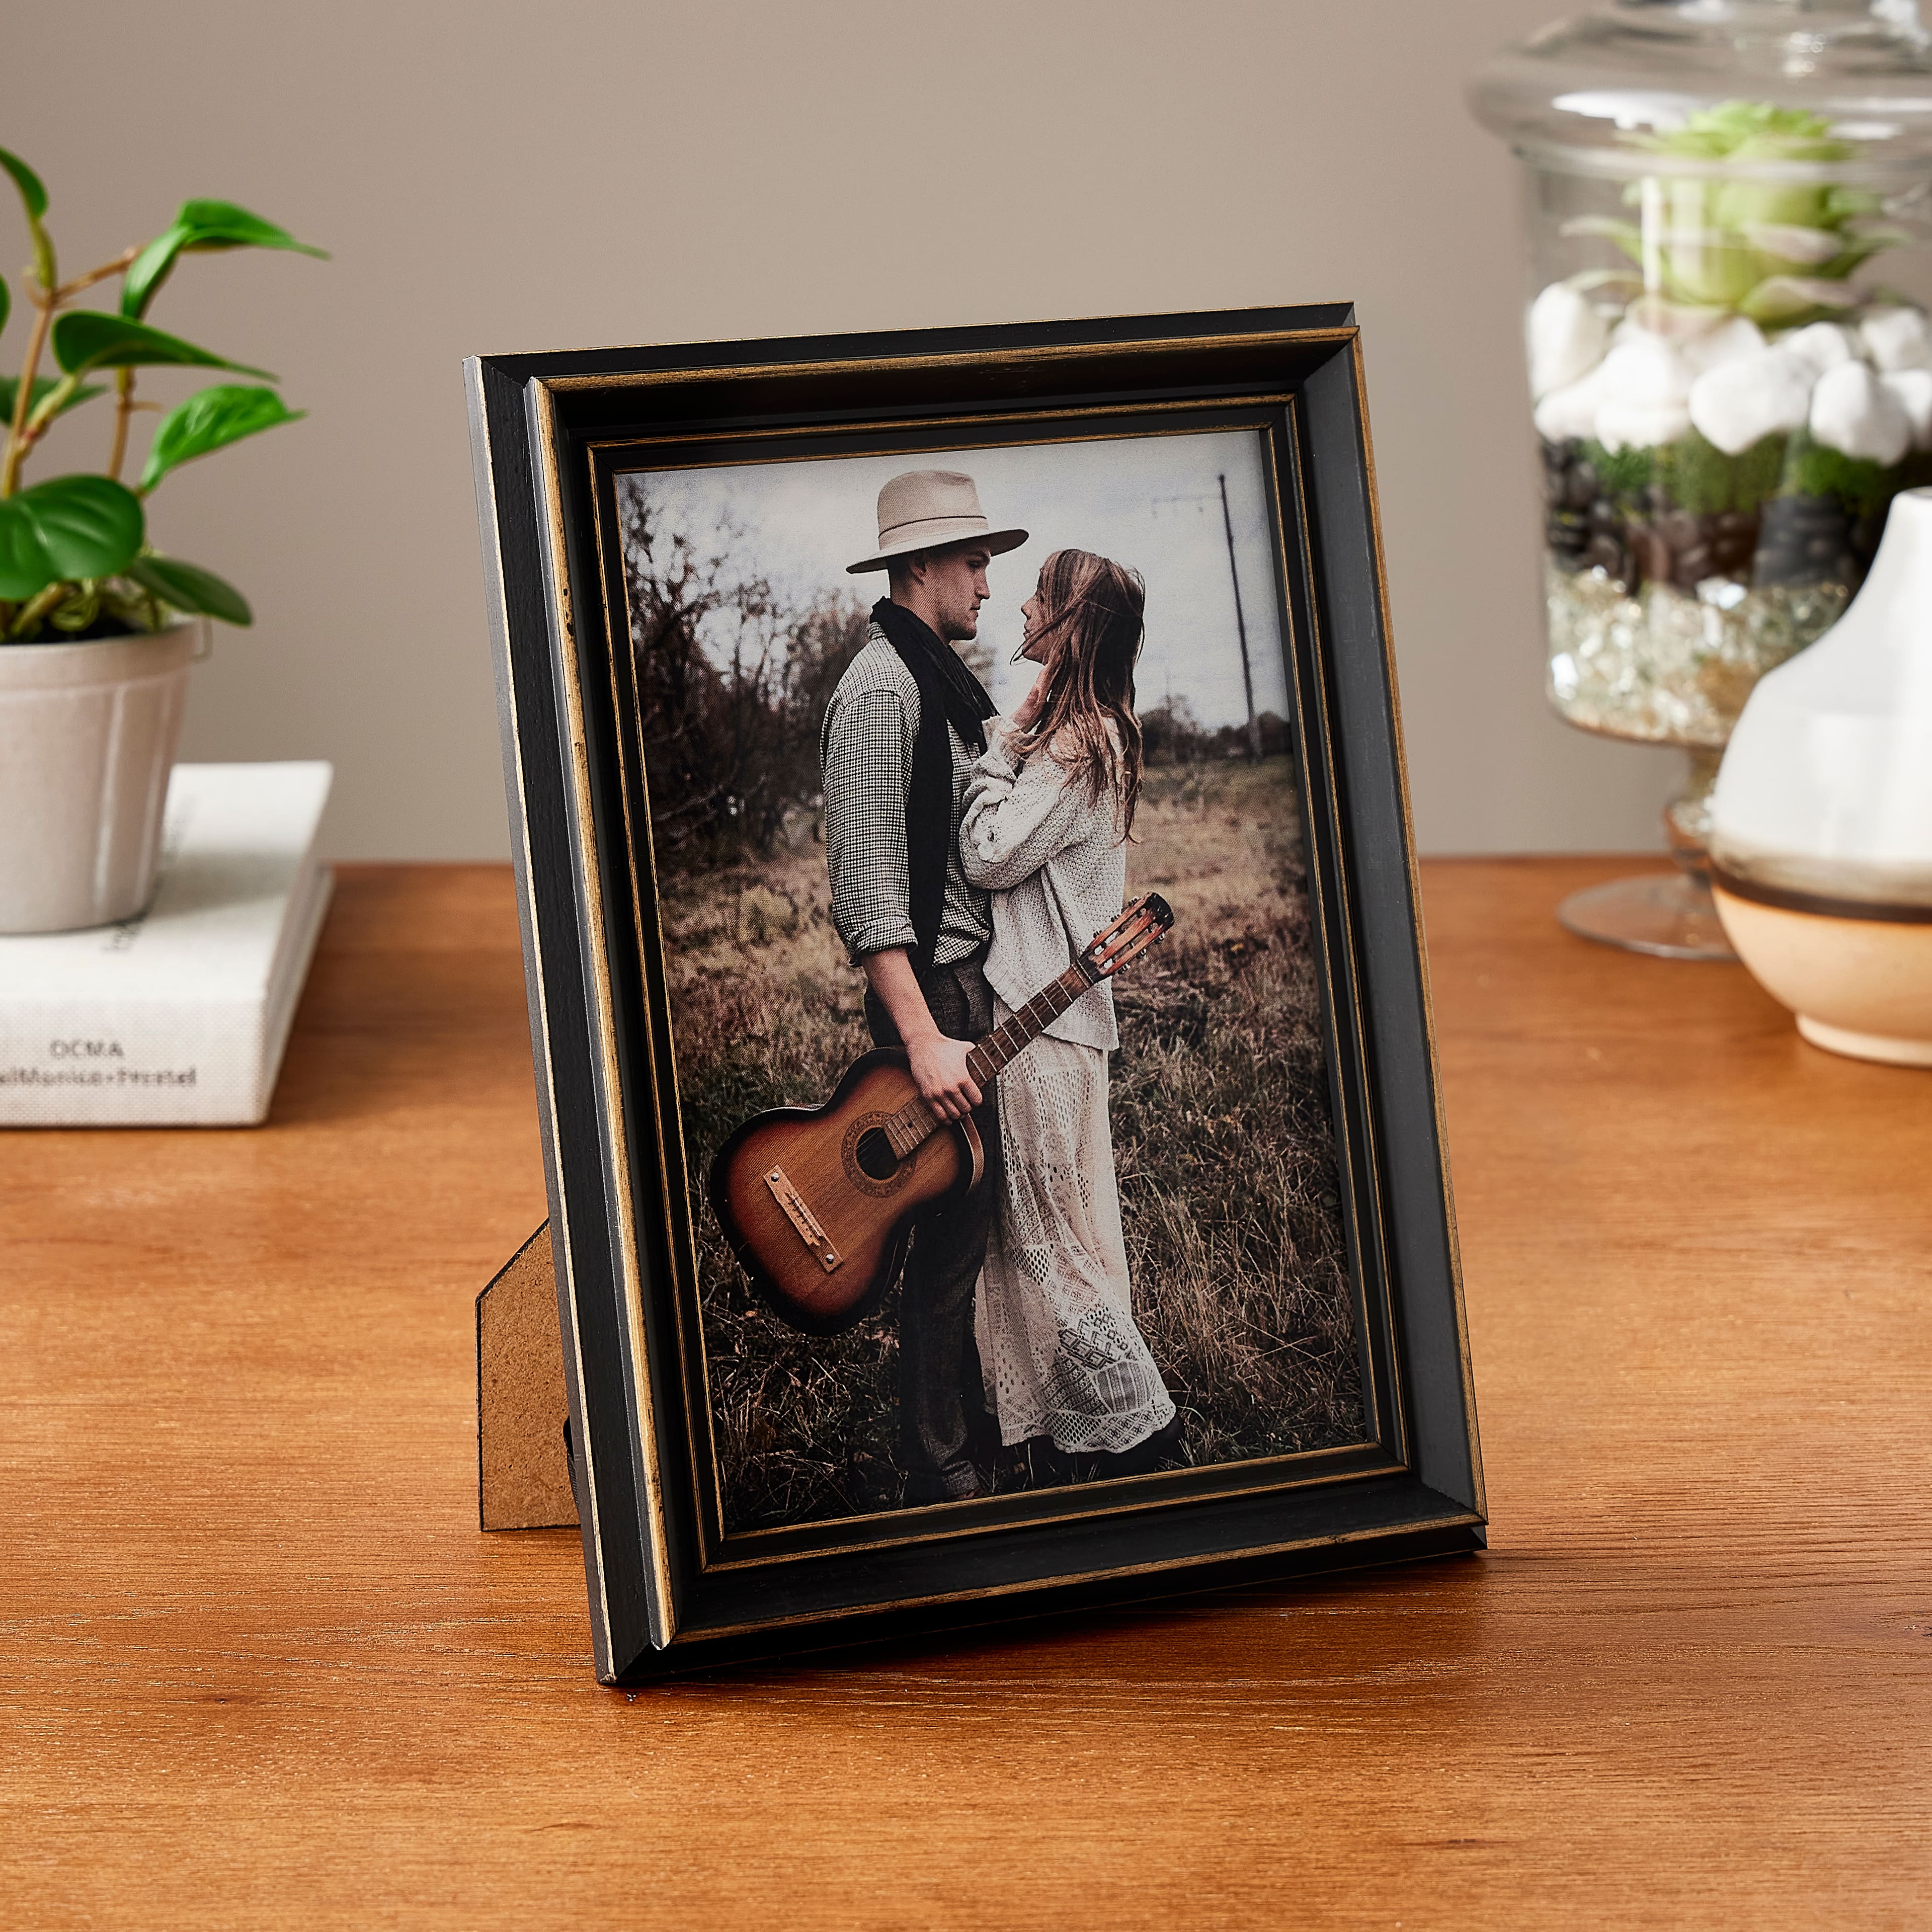 Distressed Black Simply Essentials&#x2122; Wood Frame by Studio D&#xE9;cor&#xAE;